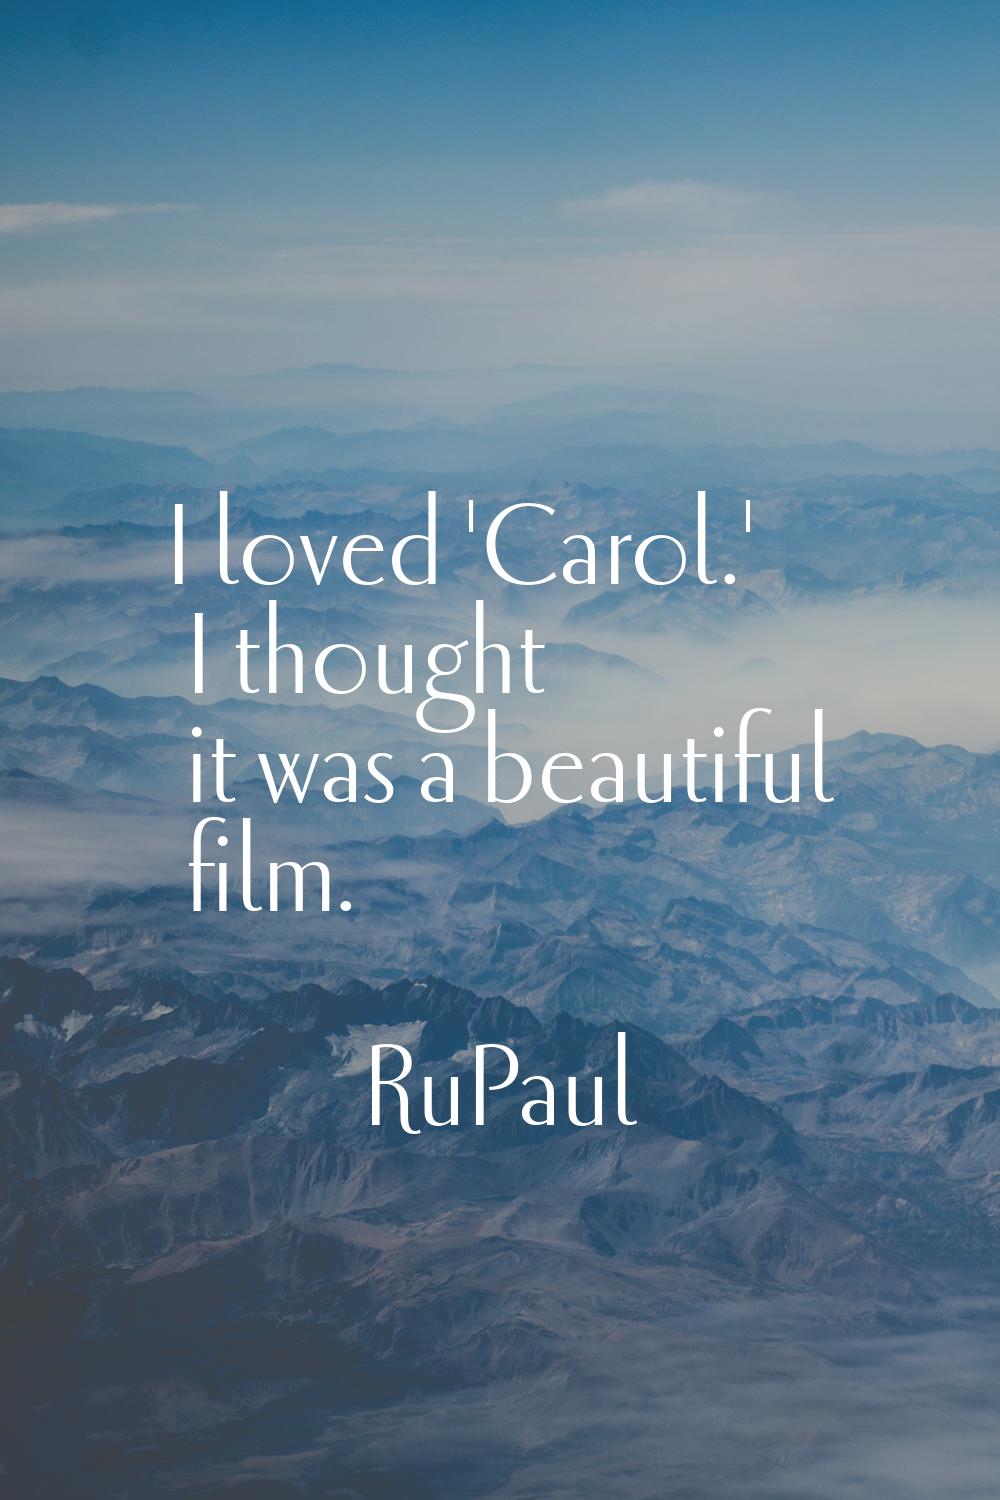 I loved 'Carol.' I thought it was a beautiful film.